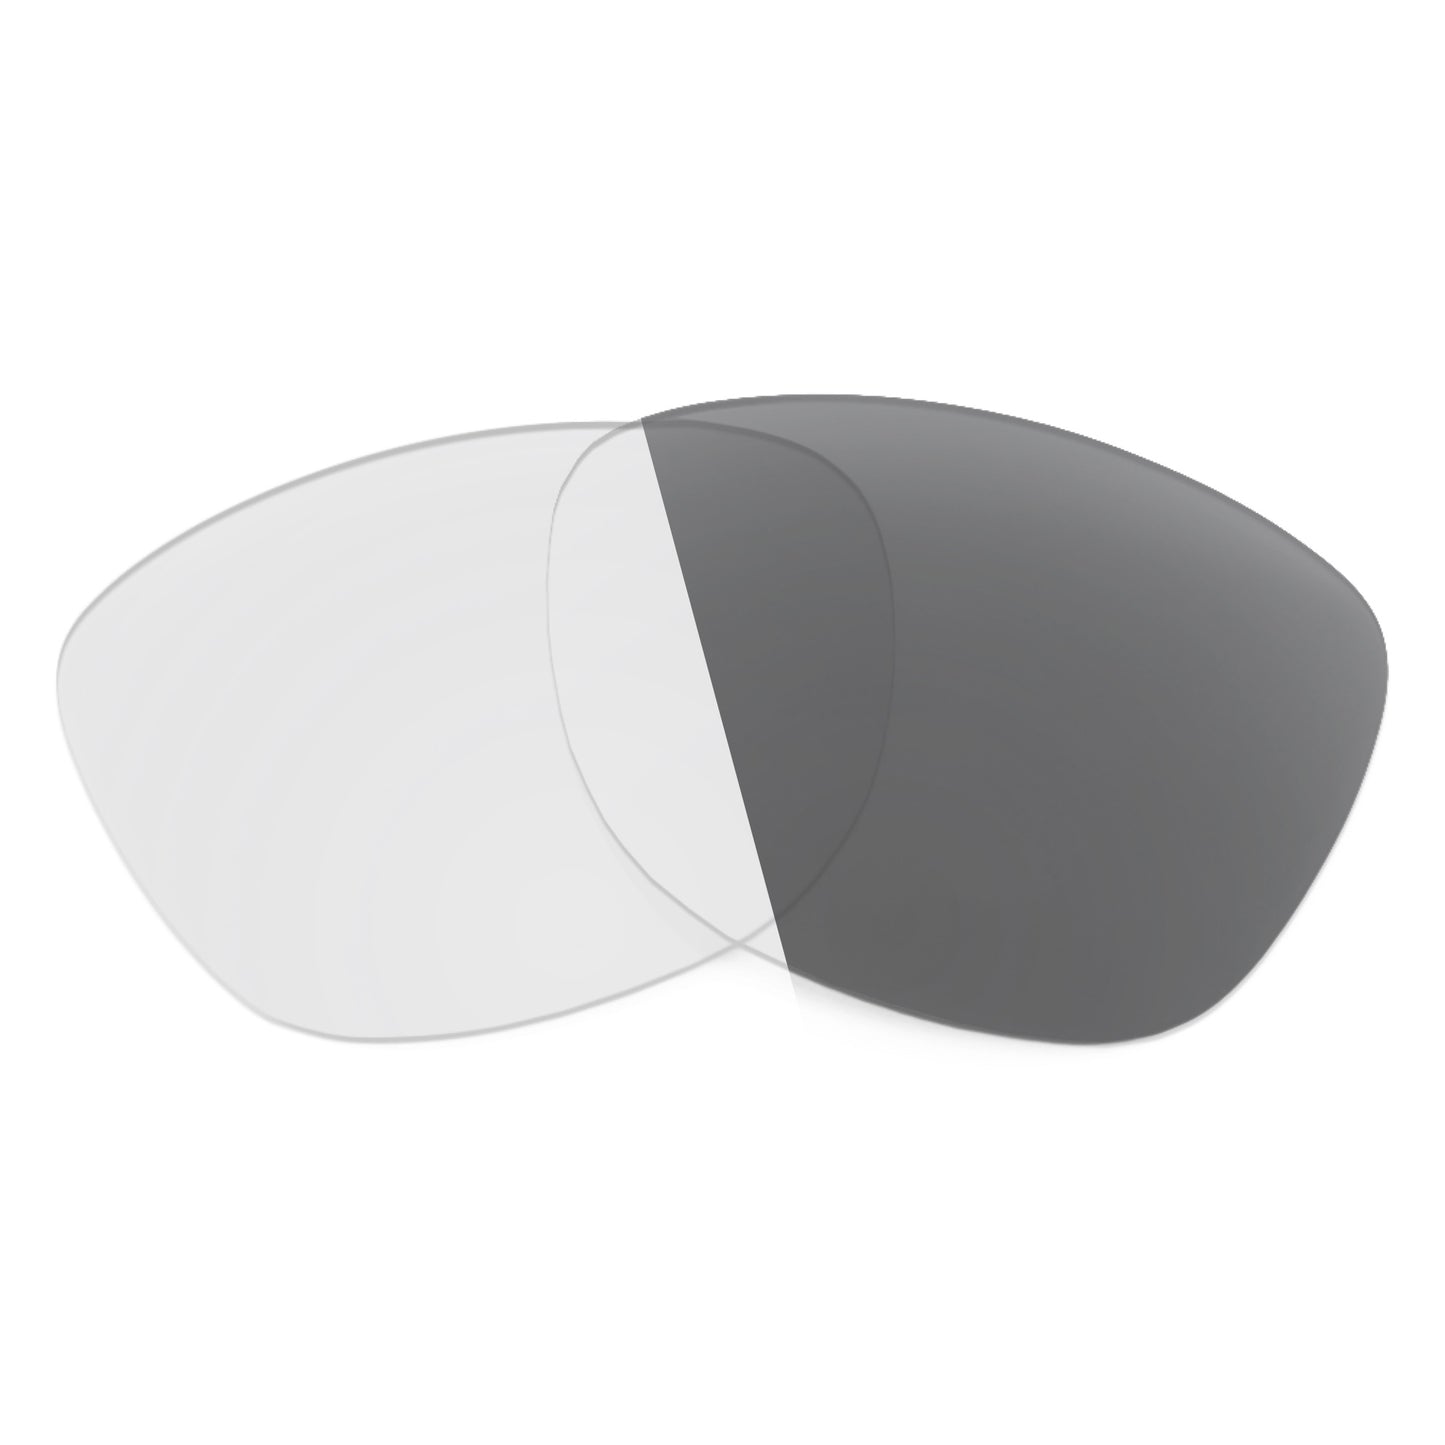 Revant replacement lenses for Oakley Frogskins XS Non-Polarized Adapt Gray Photochromic